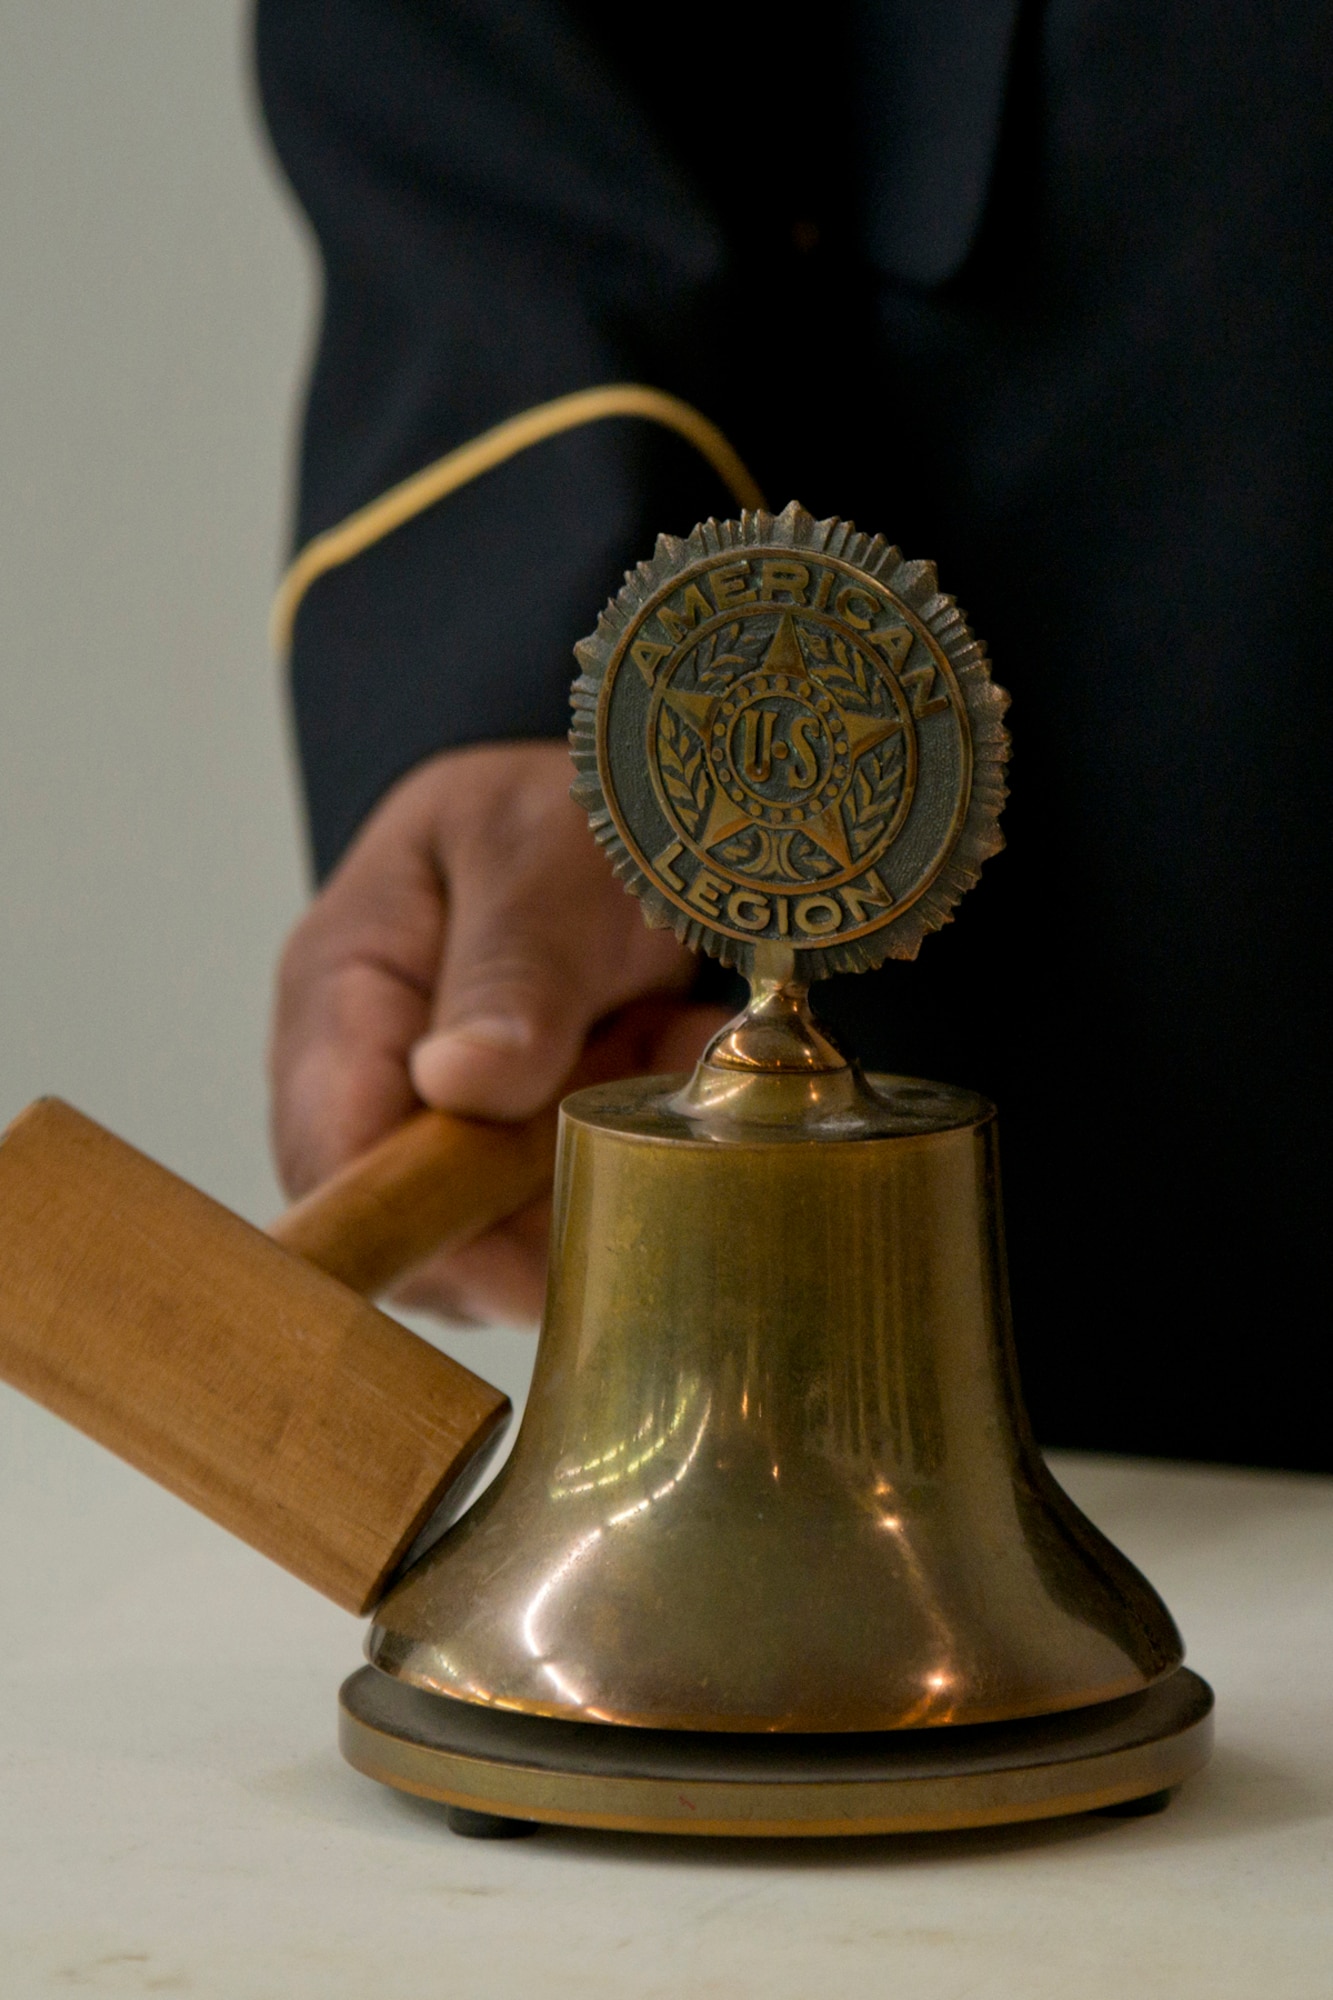 A bell is tapped during the Roll Call of Fallen Heroes during the 11th Annual Tribute to Fallen Heroes Ceremony in Sherwood, Ark., Apr. 9, 2016. The annual ceremony honors the memory of all Arkansans whom made the ultimate sacrifice as a result of the war against terrorism. The bell rang a total of 138 times. (U.S. Air Force photo by Master Sgt. Jeff Walston/released) 